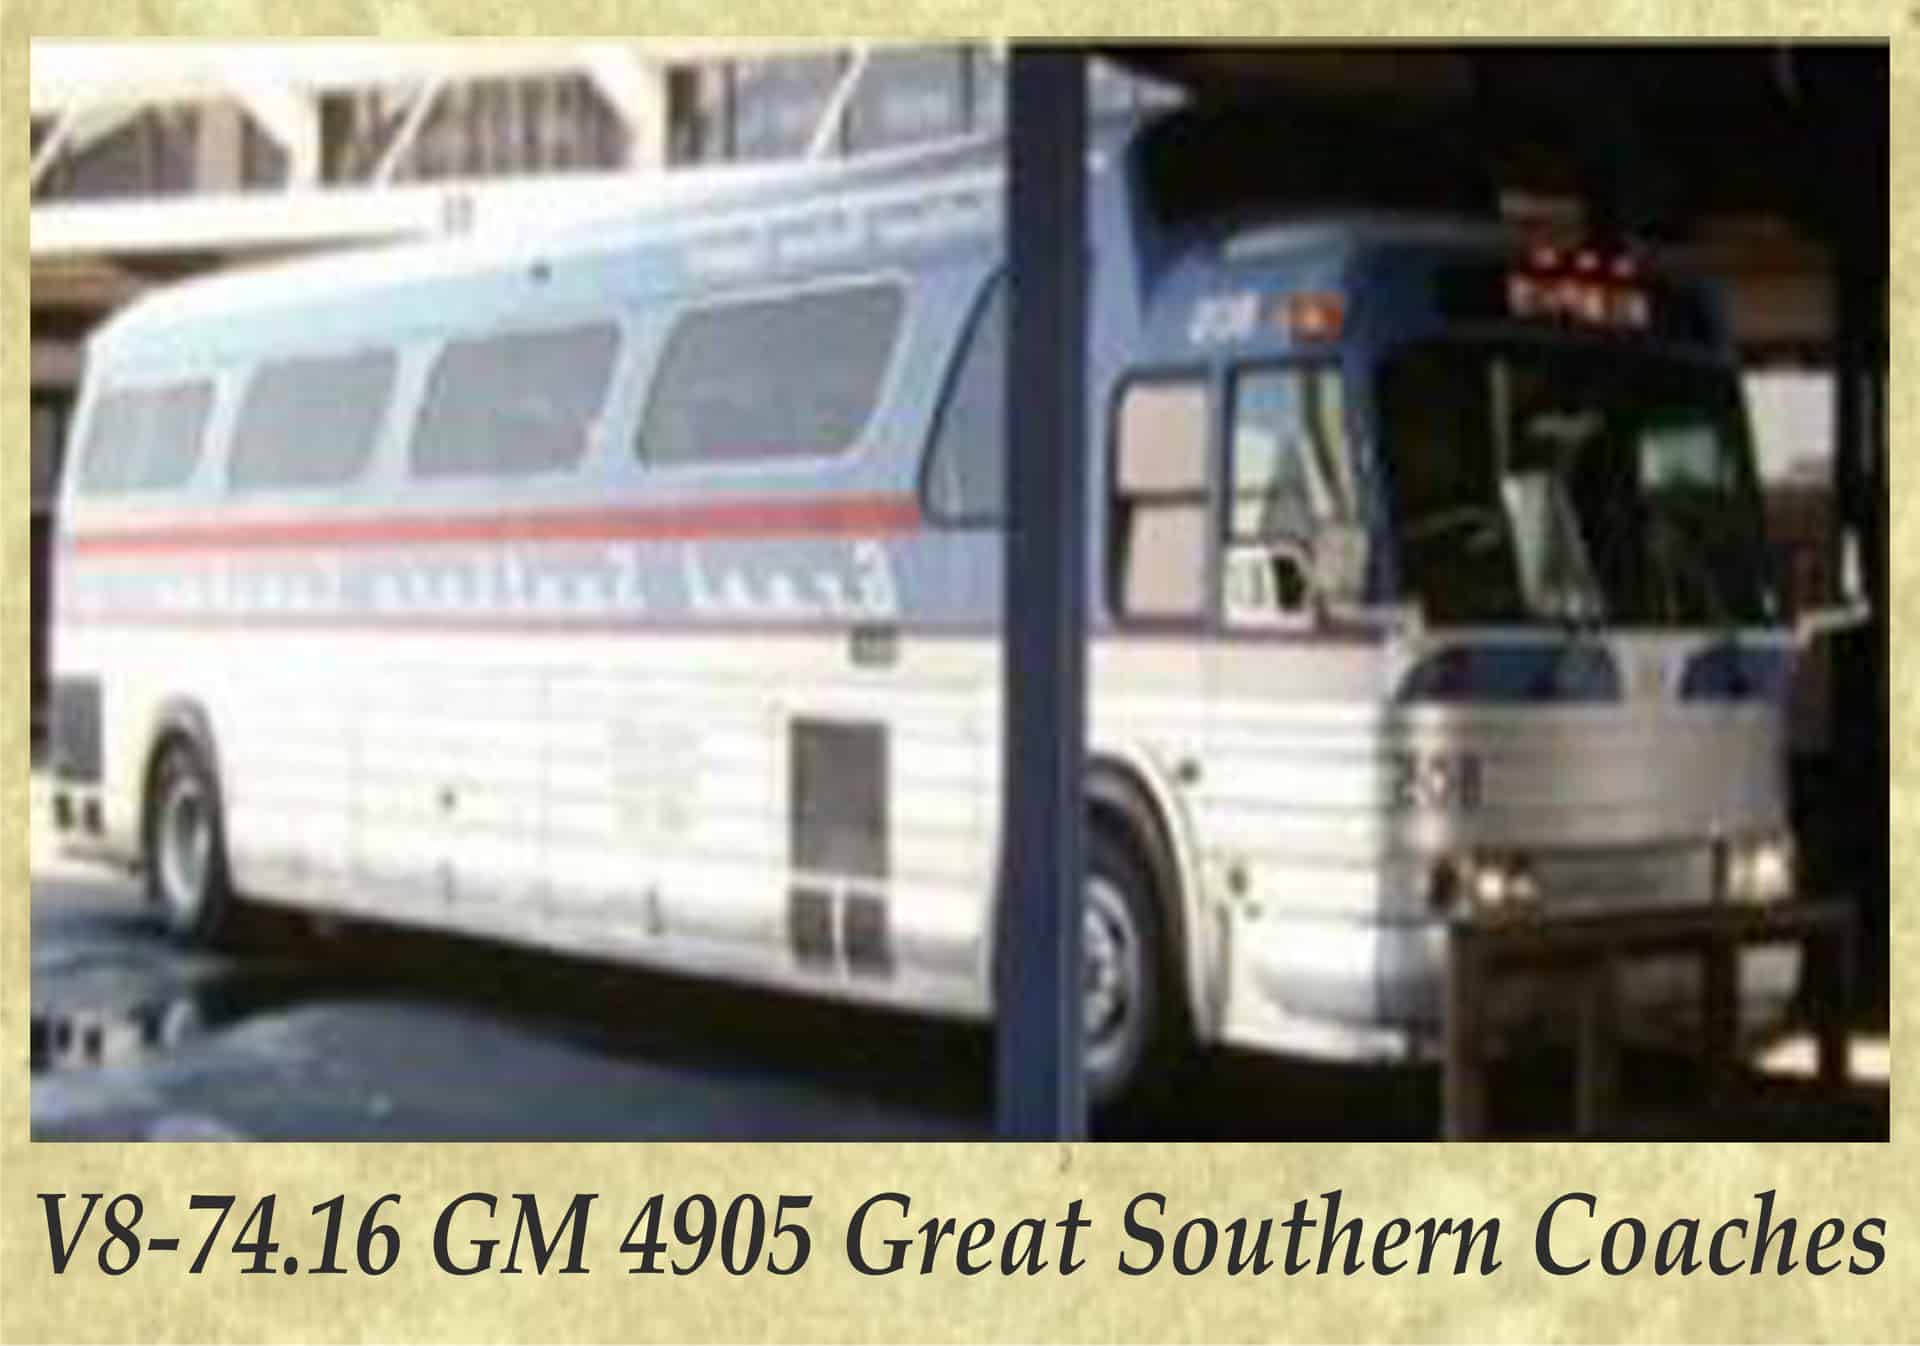 V8-74.16 GM 4905 Great Southern Coaches